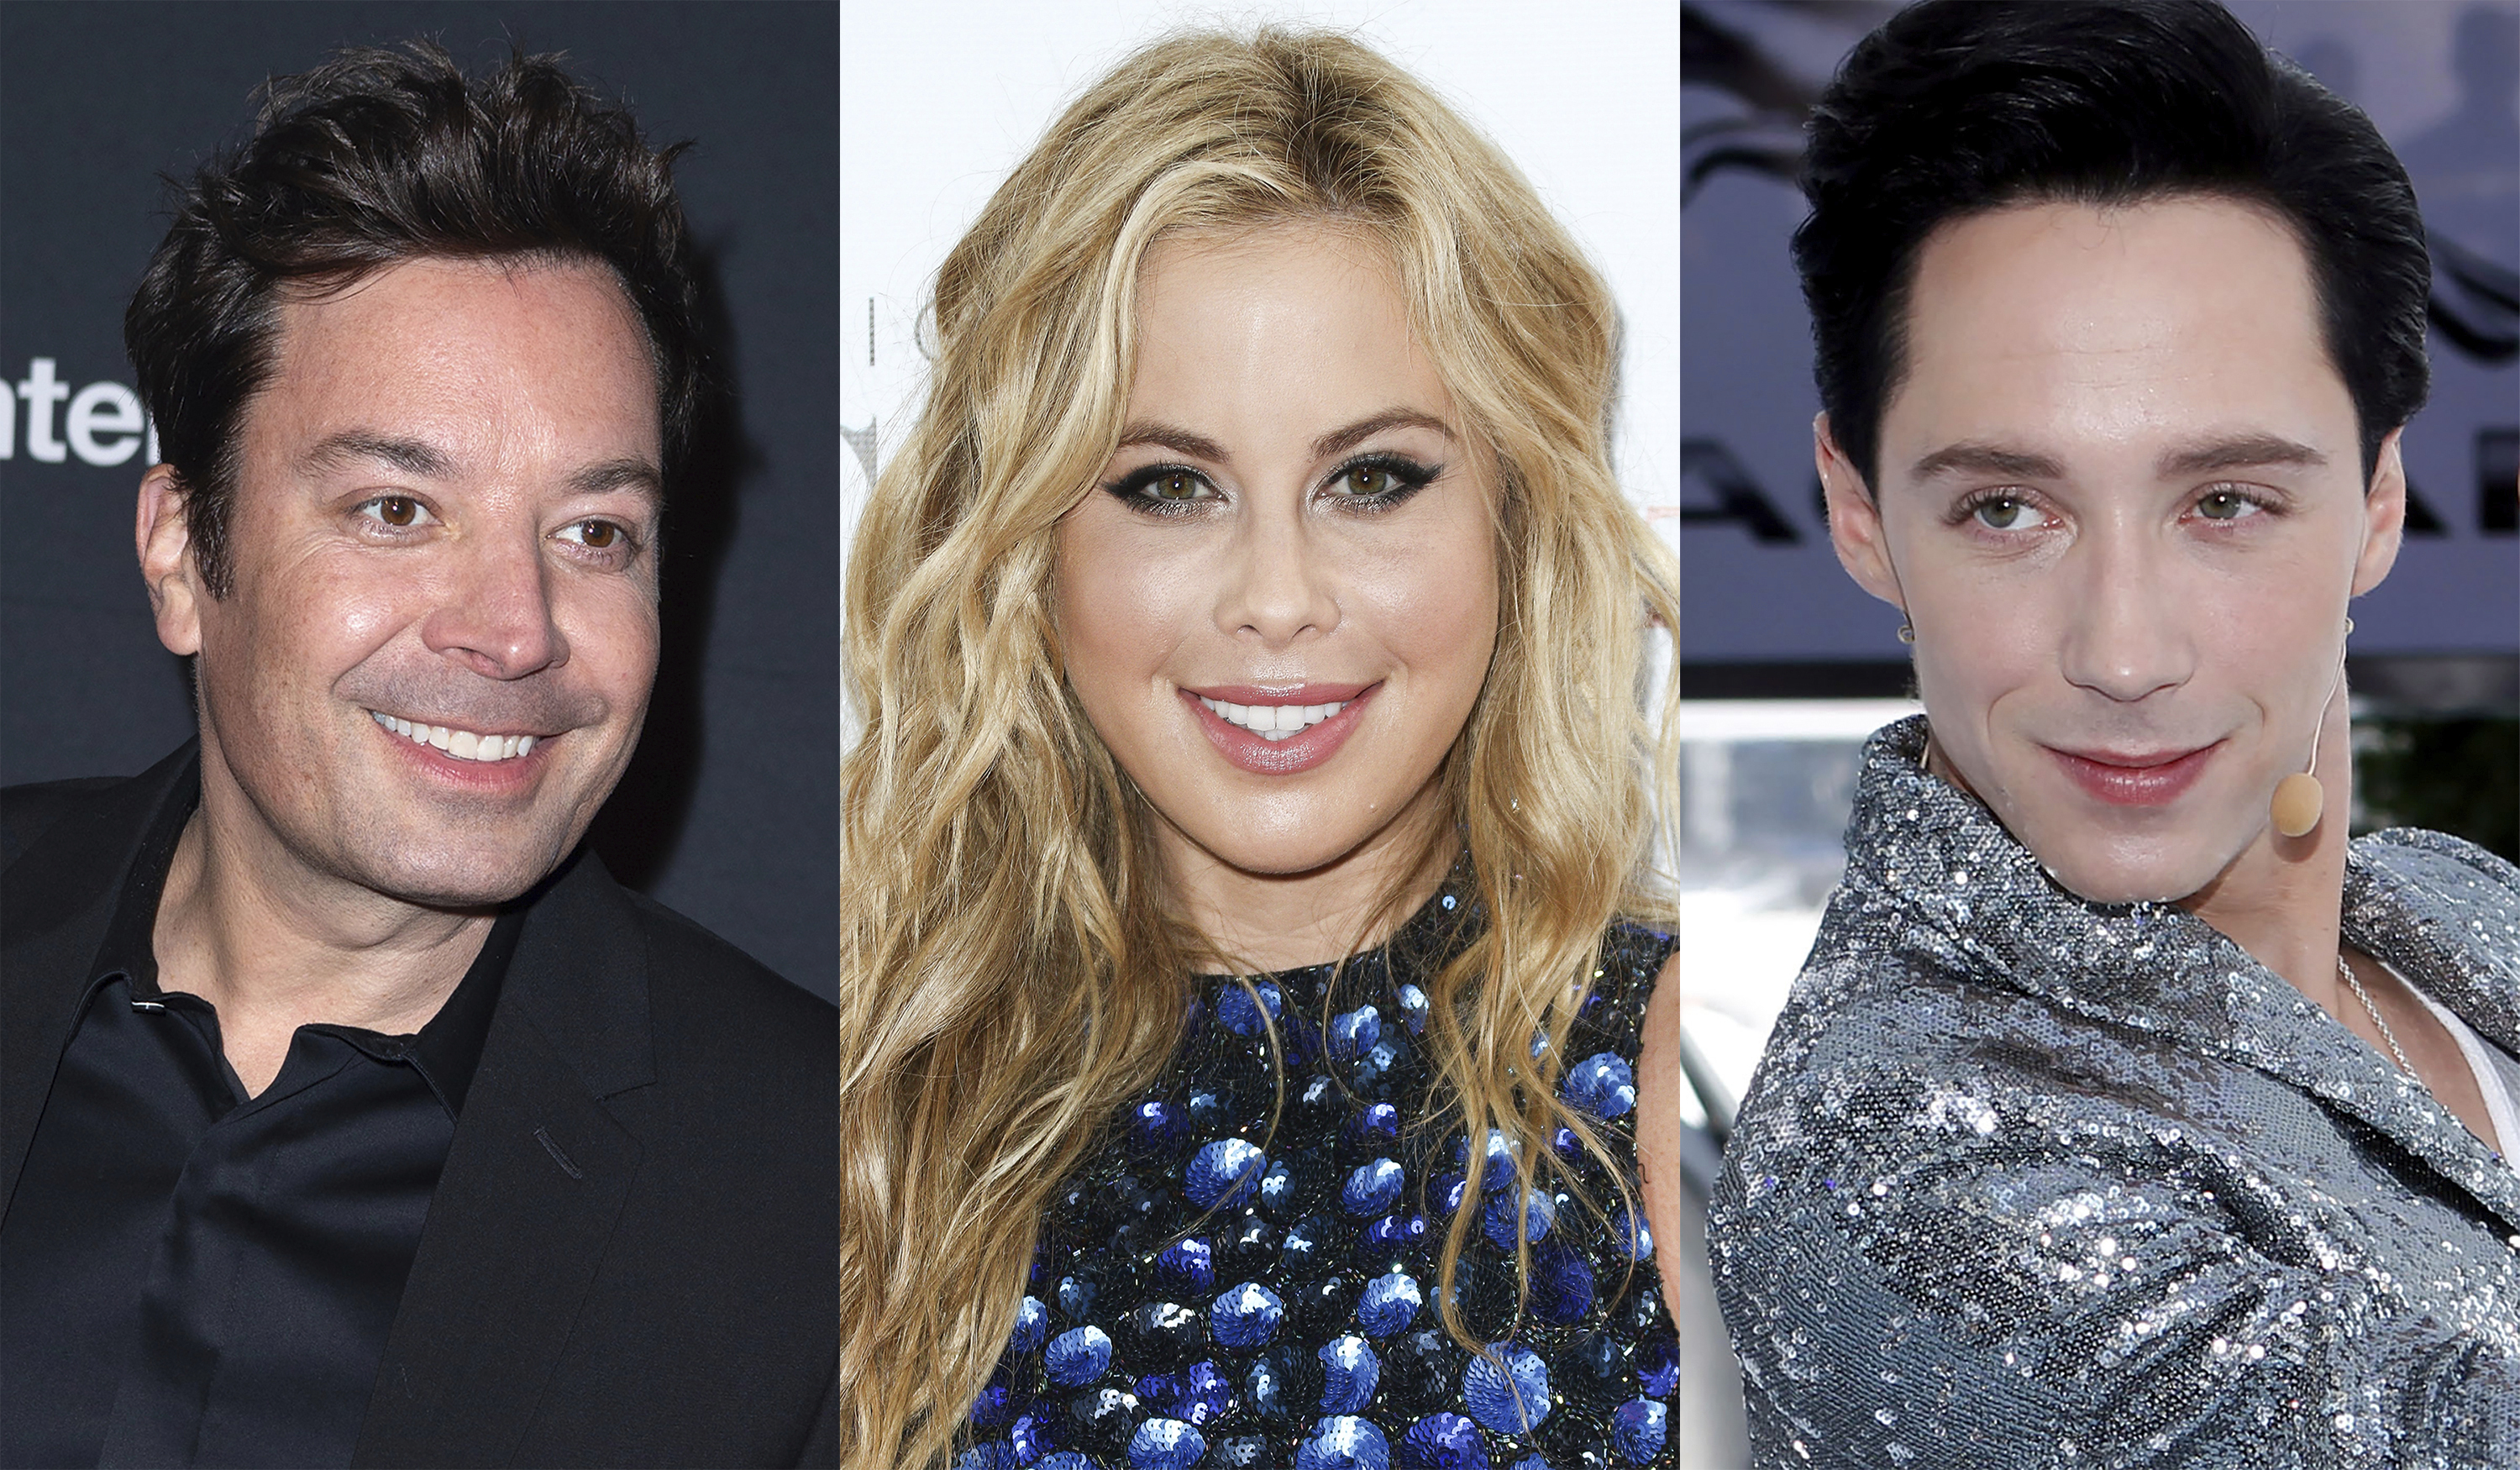 This combination of photos shows Jimmy Fallon in Washington on March 24, 2024, left, Olympic figure skater Tara Lipinski in Los Angeles on Aug. 1, 2015, center, and Olympic figure skater Johnny Weir in New York on Aug. 16, 2012. Fallon, Lipinski and Weir will join sportscaster Mike Tirico for NBC’s closing ceremony coverage. (AP Photo)